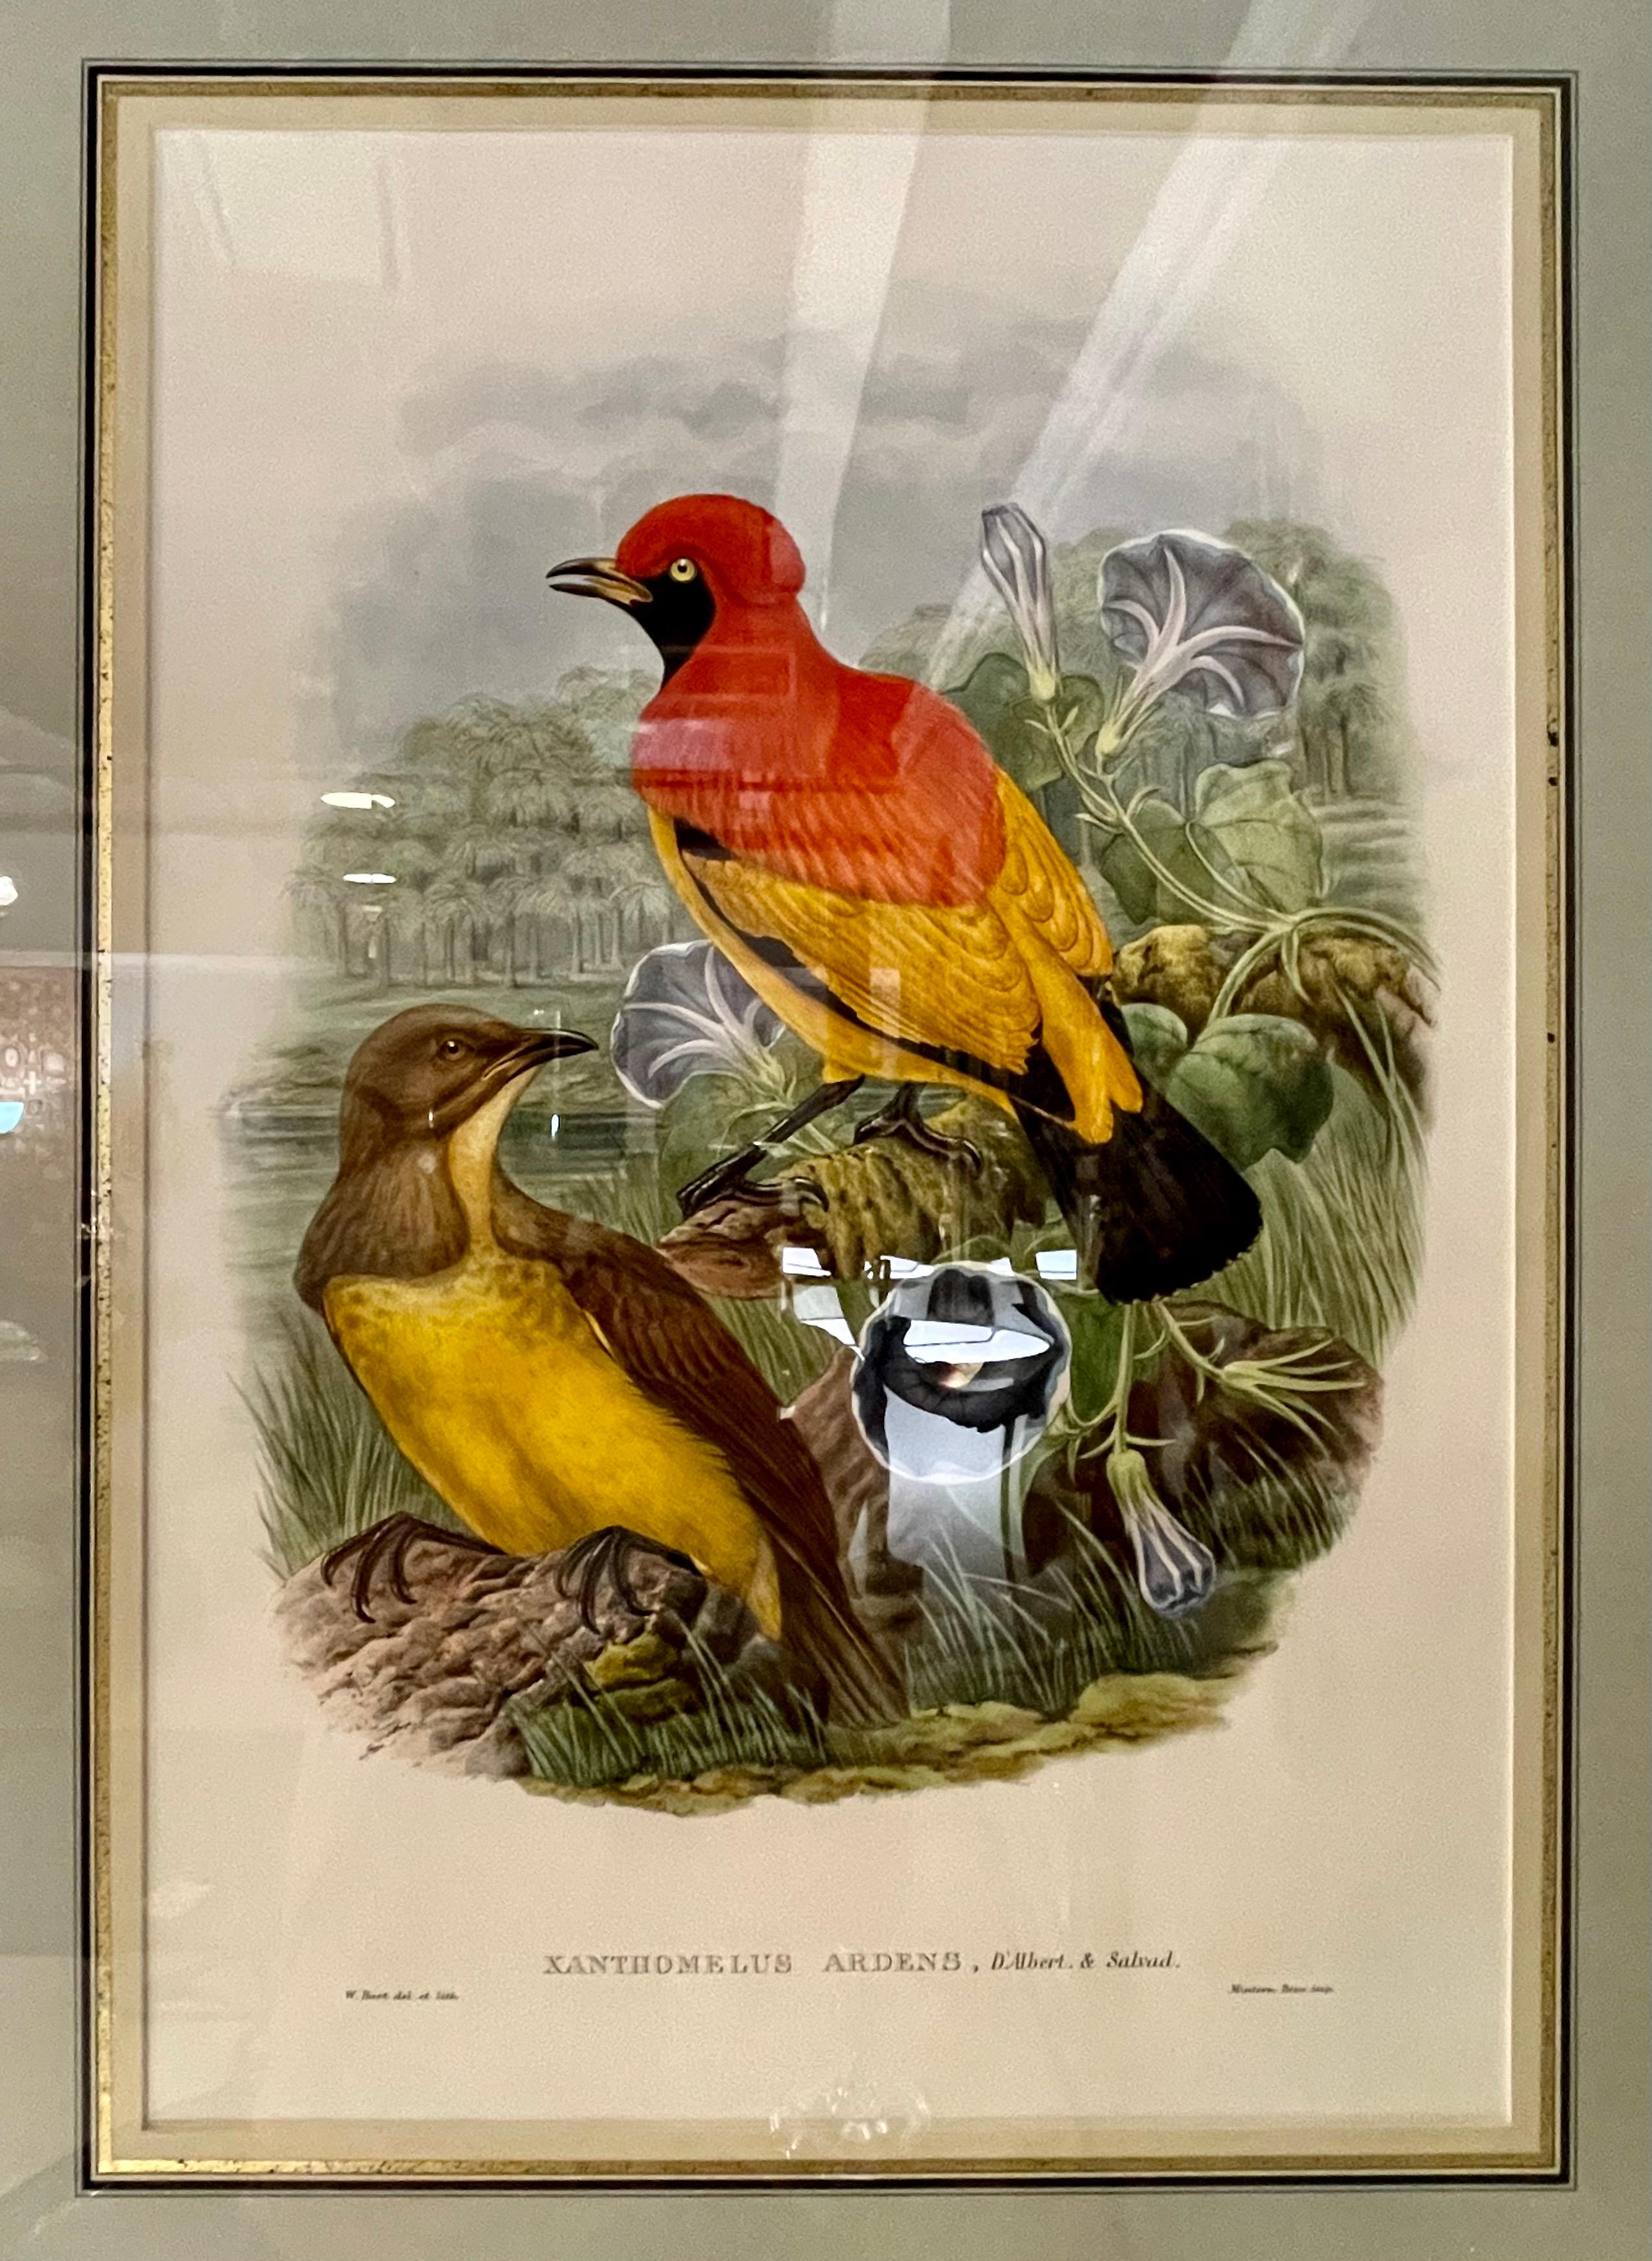 19Th Century Pair of Lithographs Birds, Custom Framed, Signed W Hart and Dated
 
A fine pair of large lithographs. Each depicting colorful birds perched upon a branch. Both custom matted and placed in a Fine water gilt gold wooden frame. Signed and